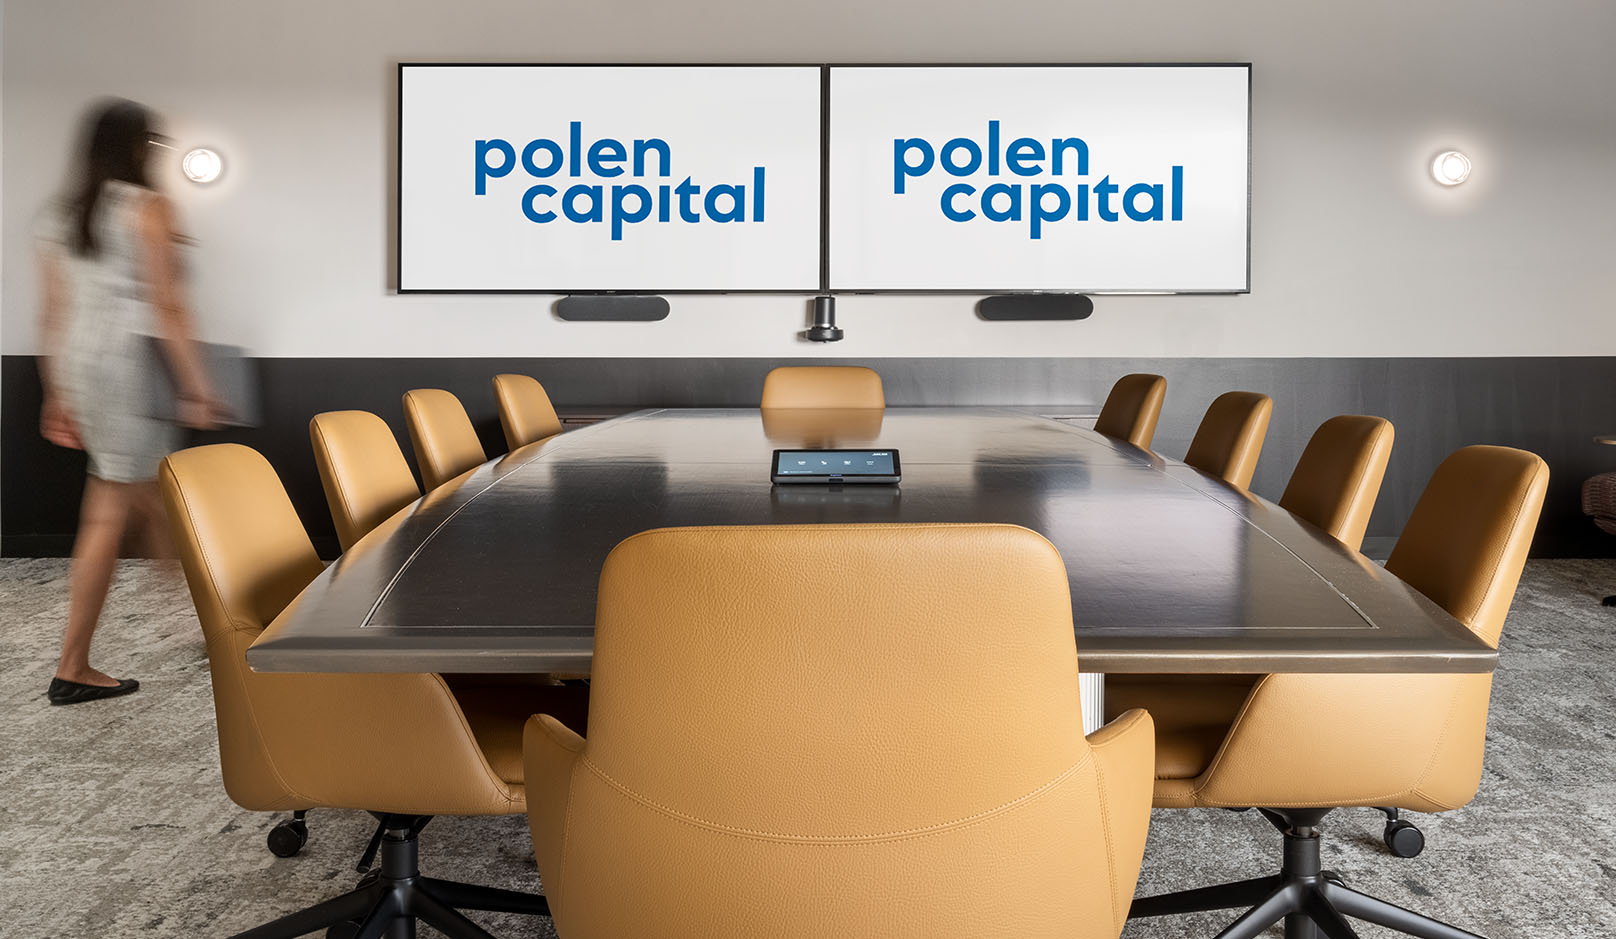 Polen Capital_Waltham_conference room 1616px